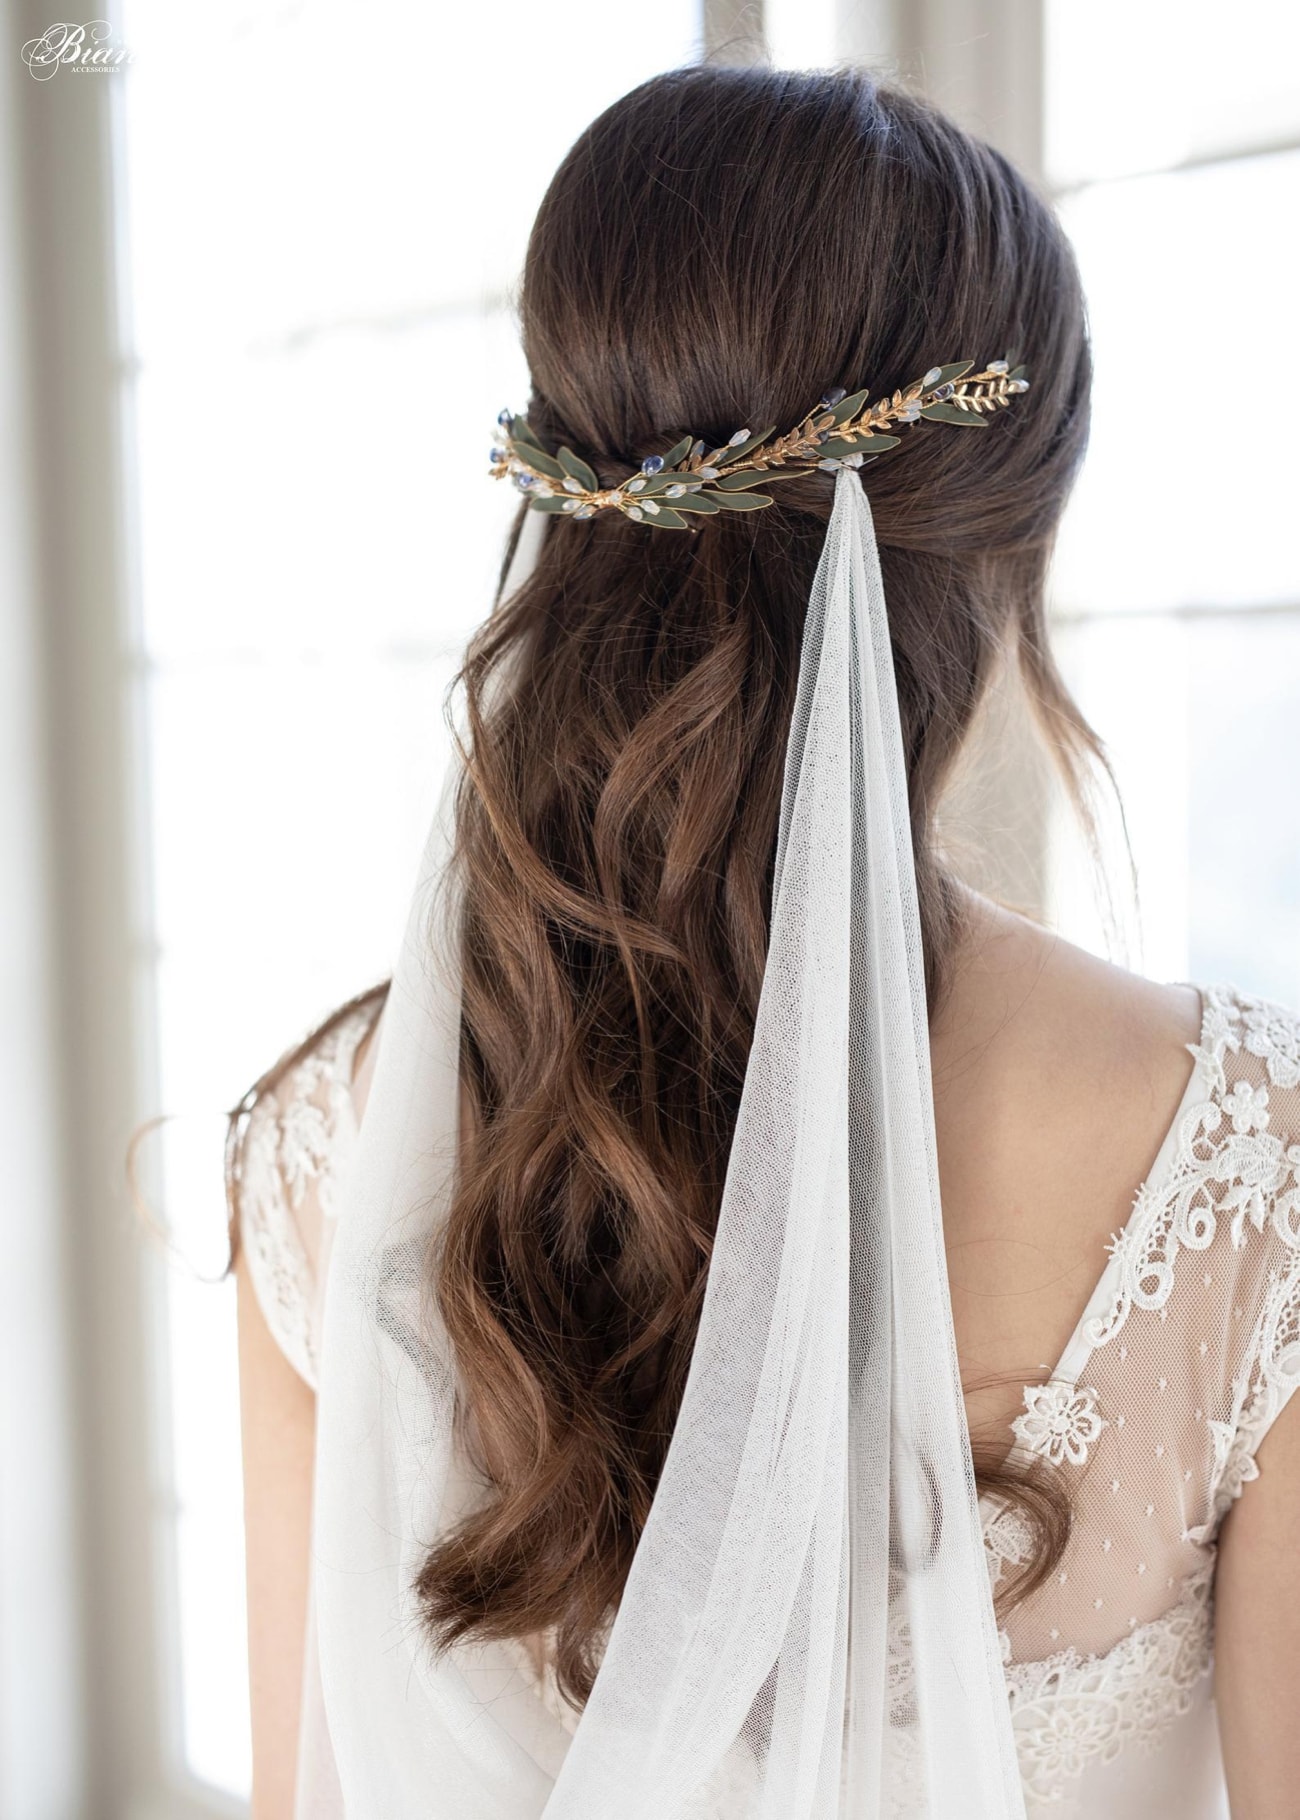 Bohemian Bridal Hairstyle Inspiration | SouthBound Bride